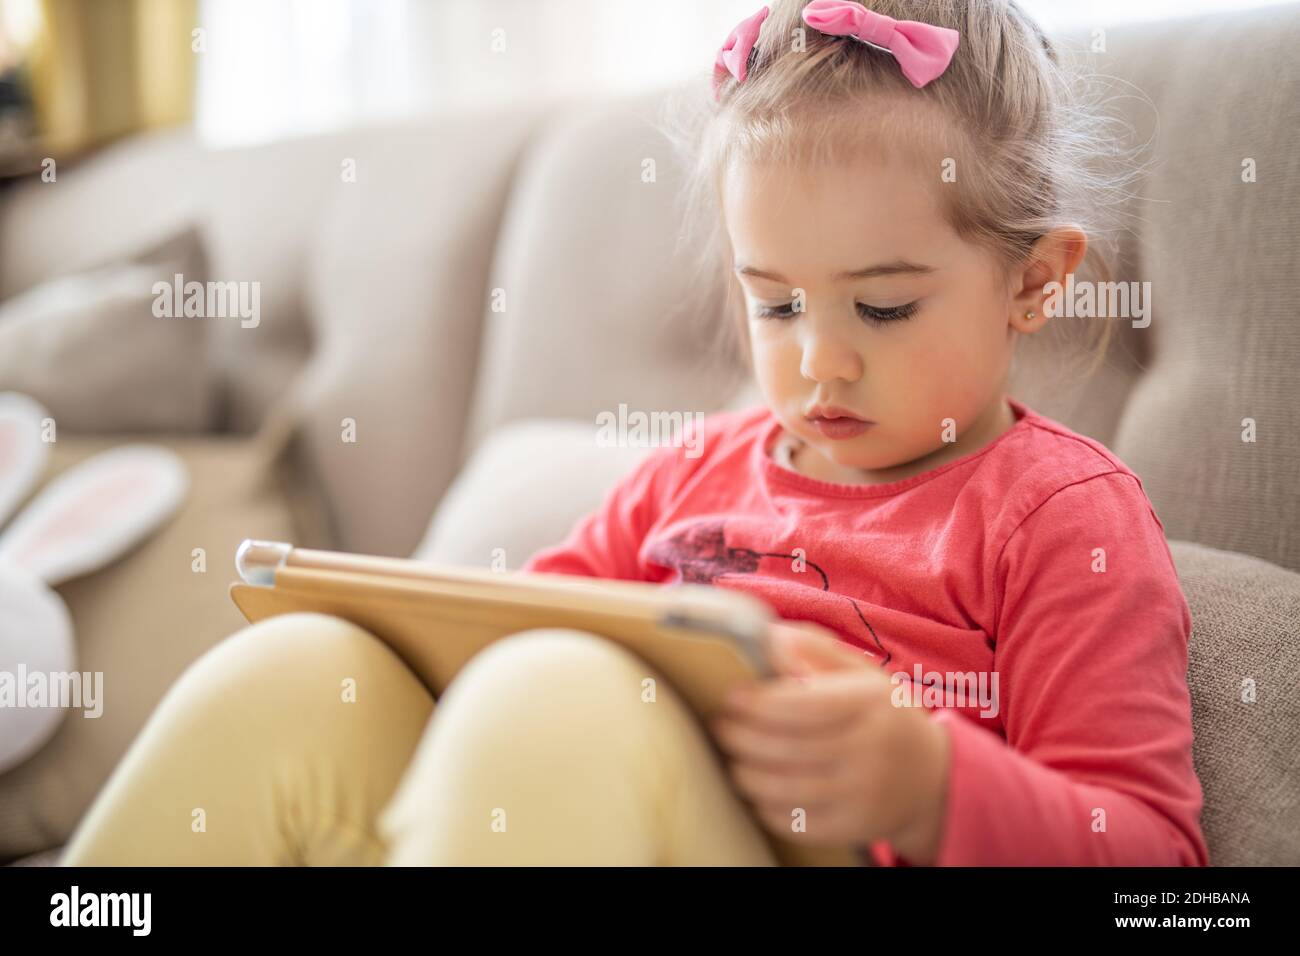 Young cute girl sitting at home using a child's tablet touch screen computer during home schooling due to closure of schools and pre-schools. Toddler Stock Photo